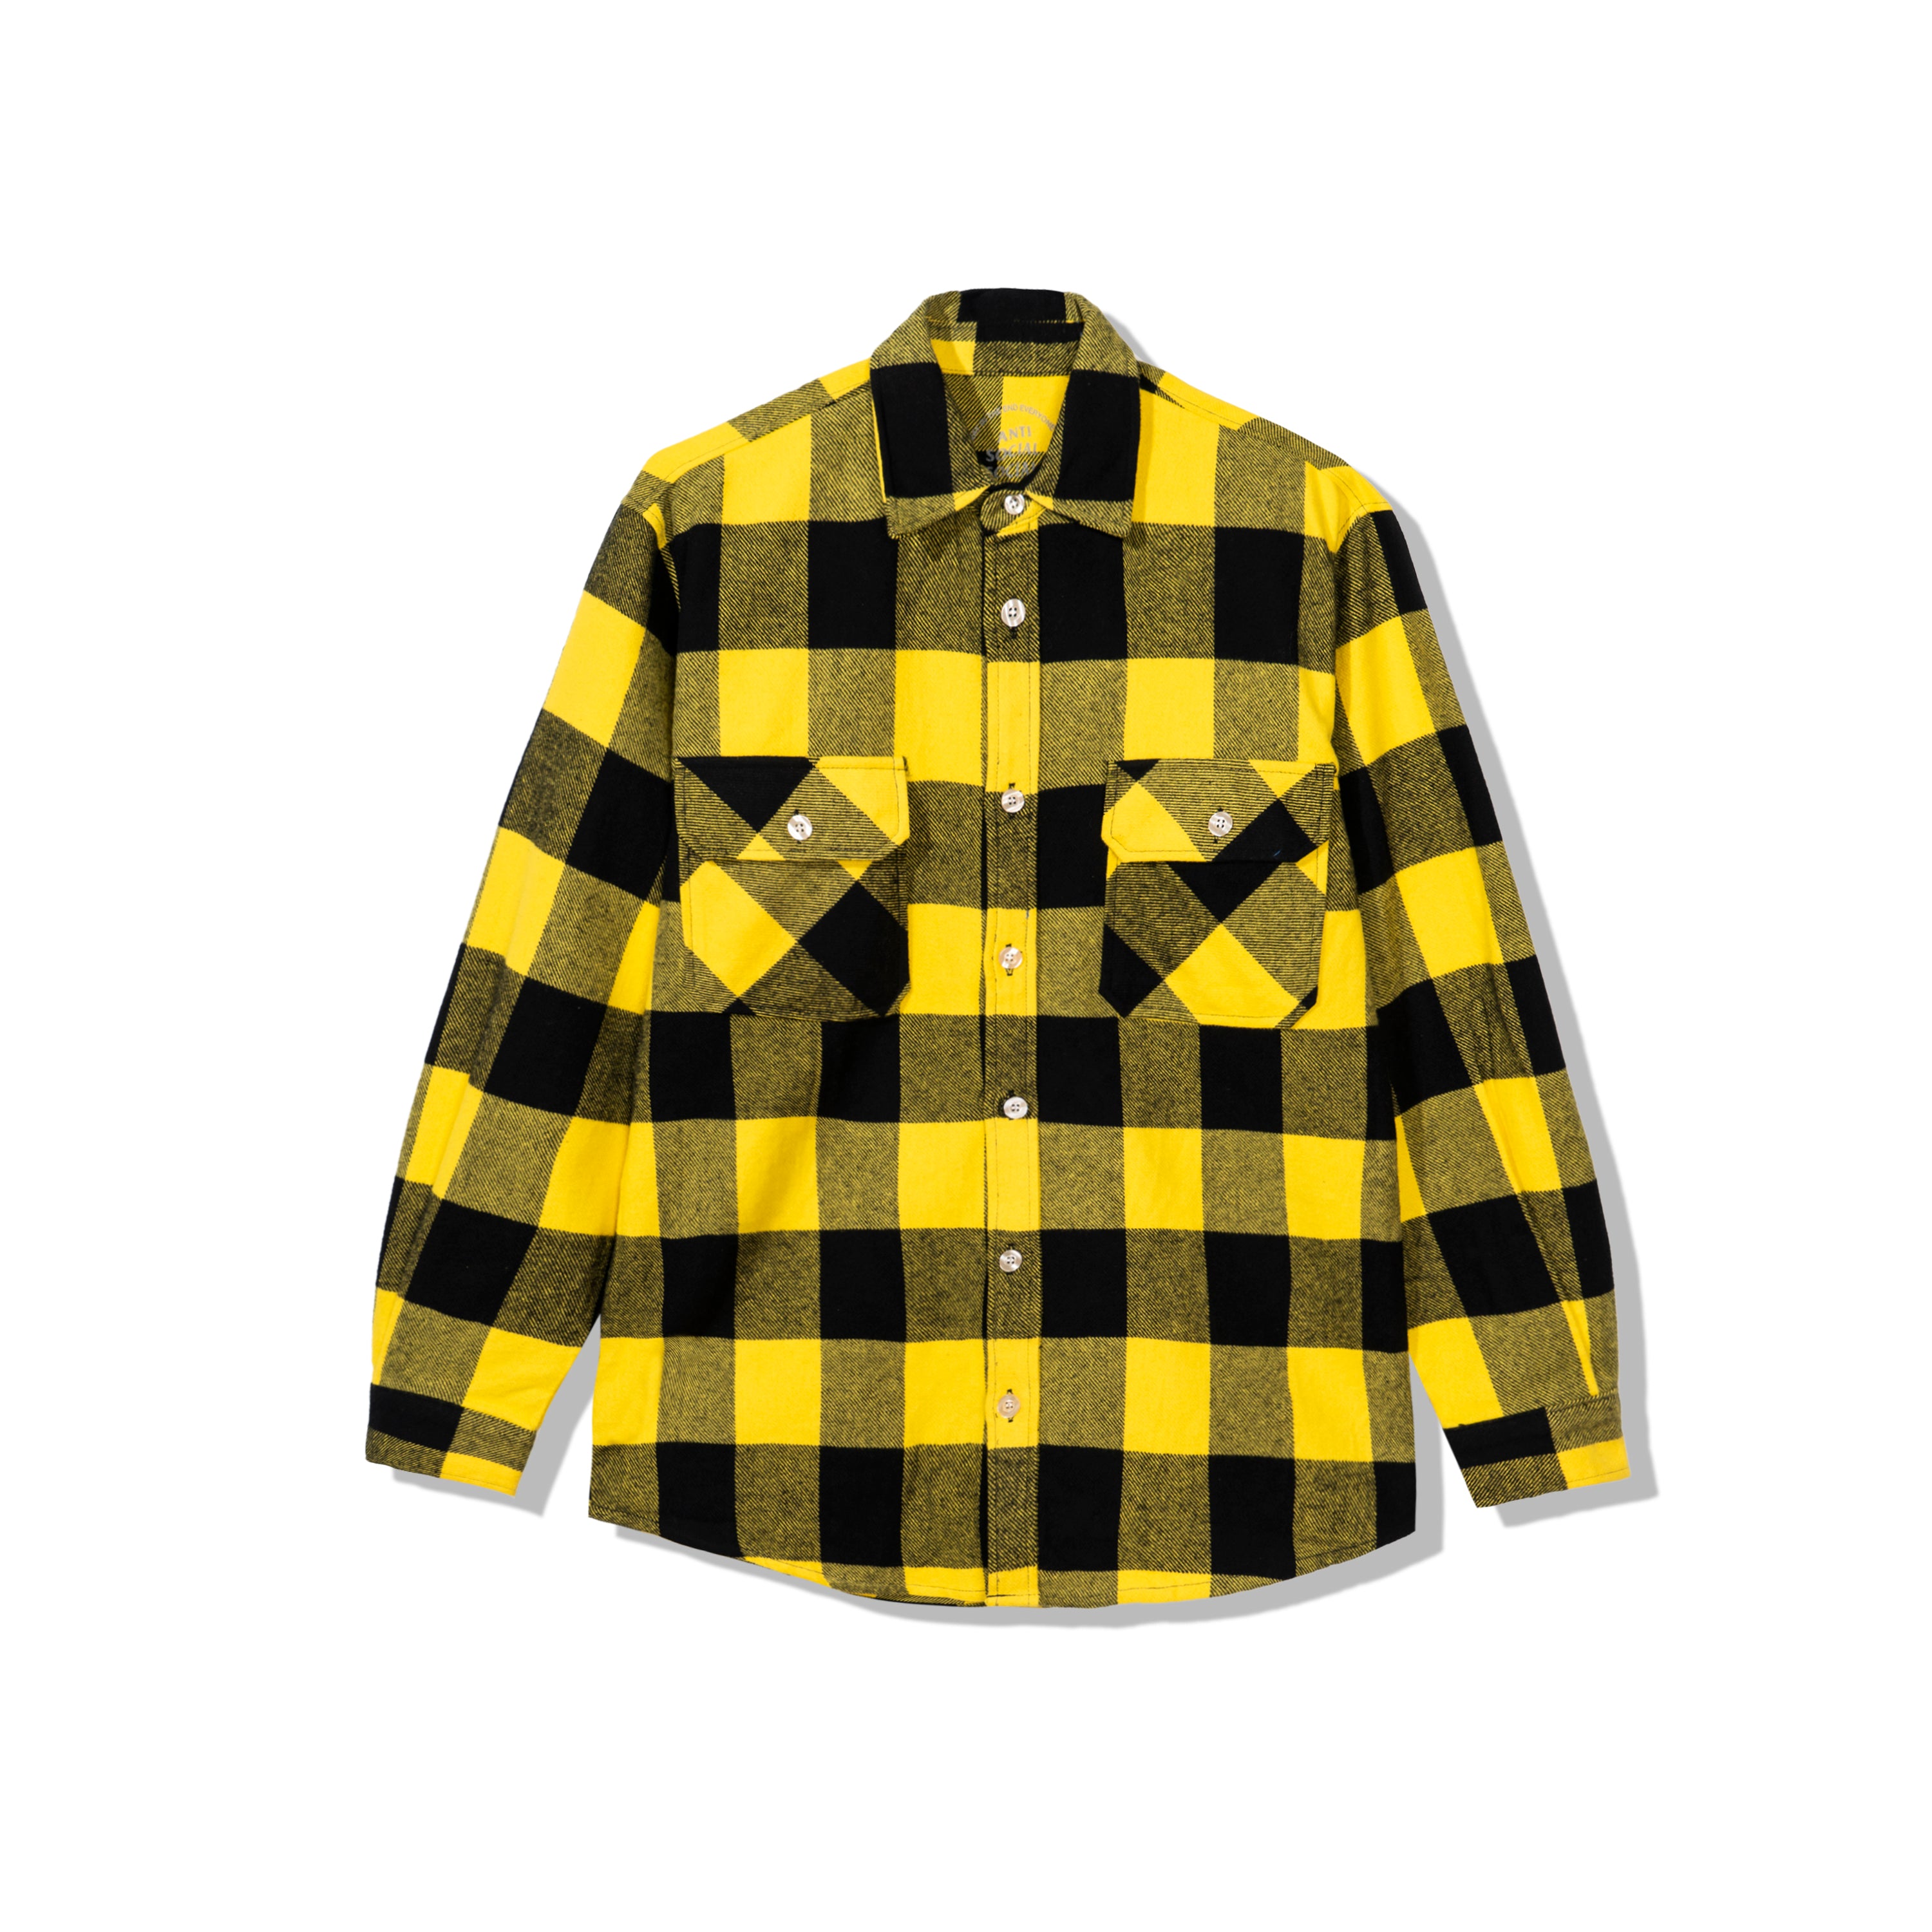 Bored Games Yellow Flannel